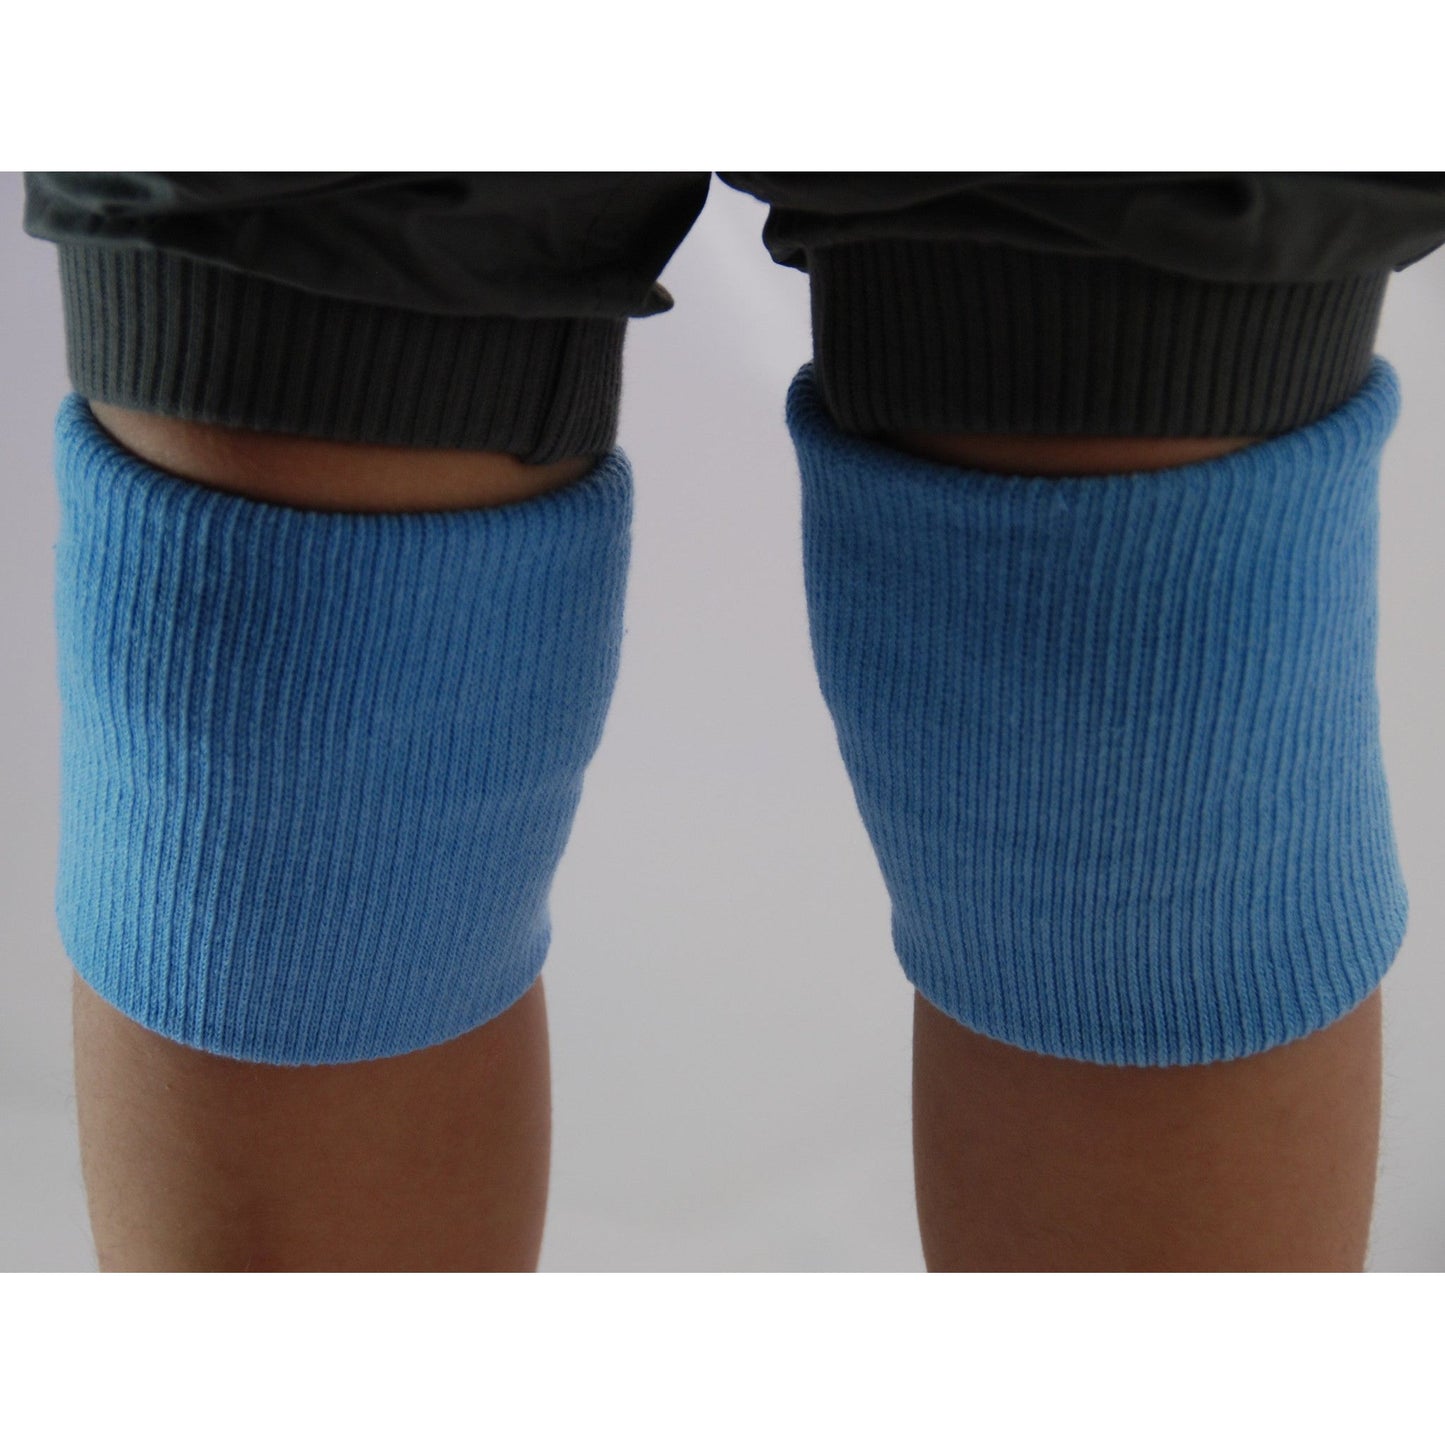 soft double layered knee protectors / knee pads for children